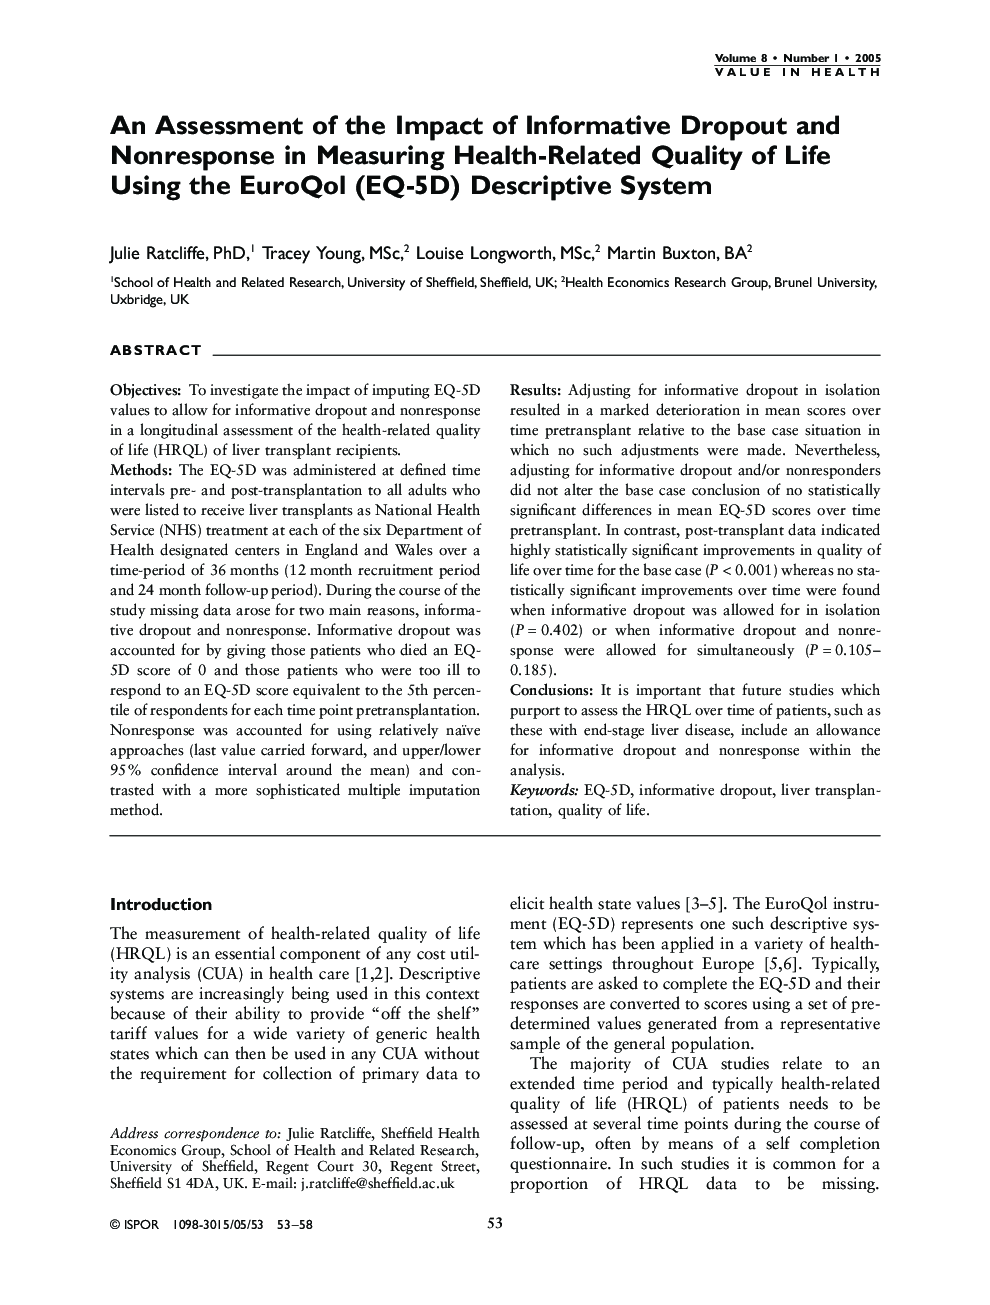 An Assessment of the Impact of Informative Dropout and Nonresponse in Measuring Health-Related Quality of Life Using the EuroQol (EQ-5D) Descriptive System